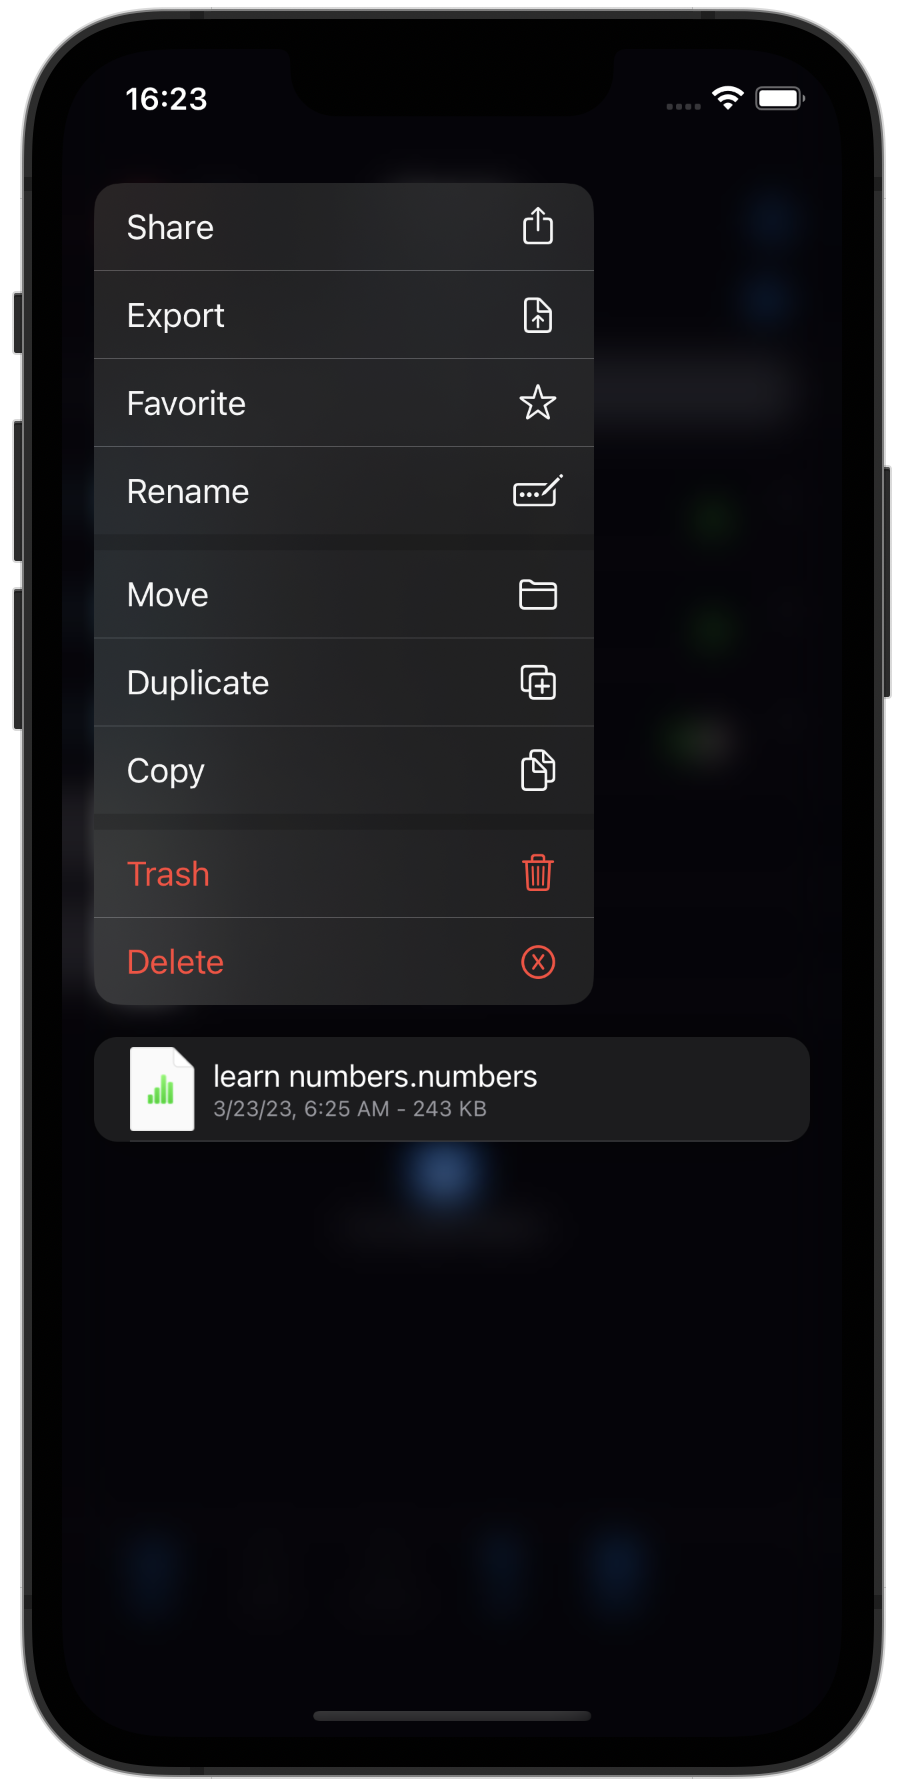 Export or share files from the Safe (iOS)